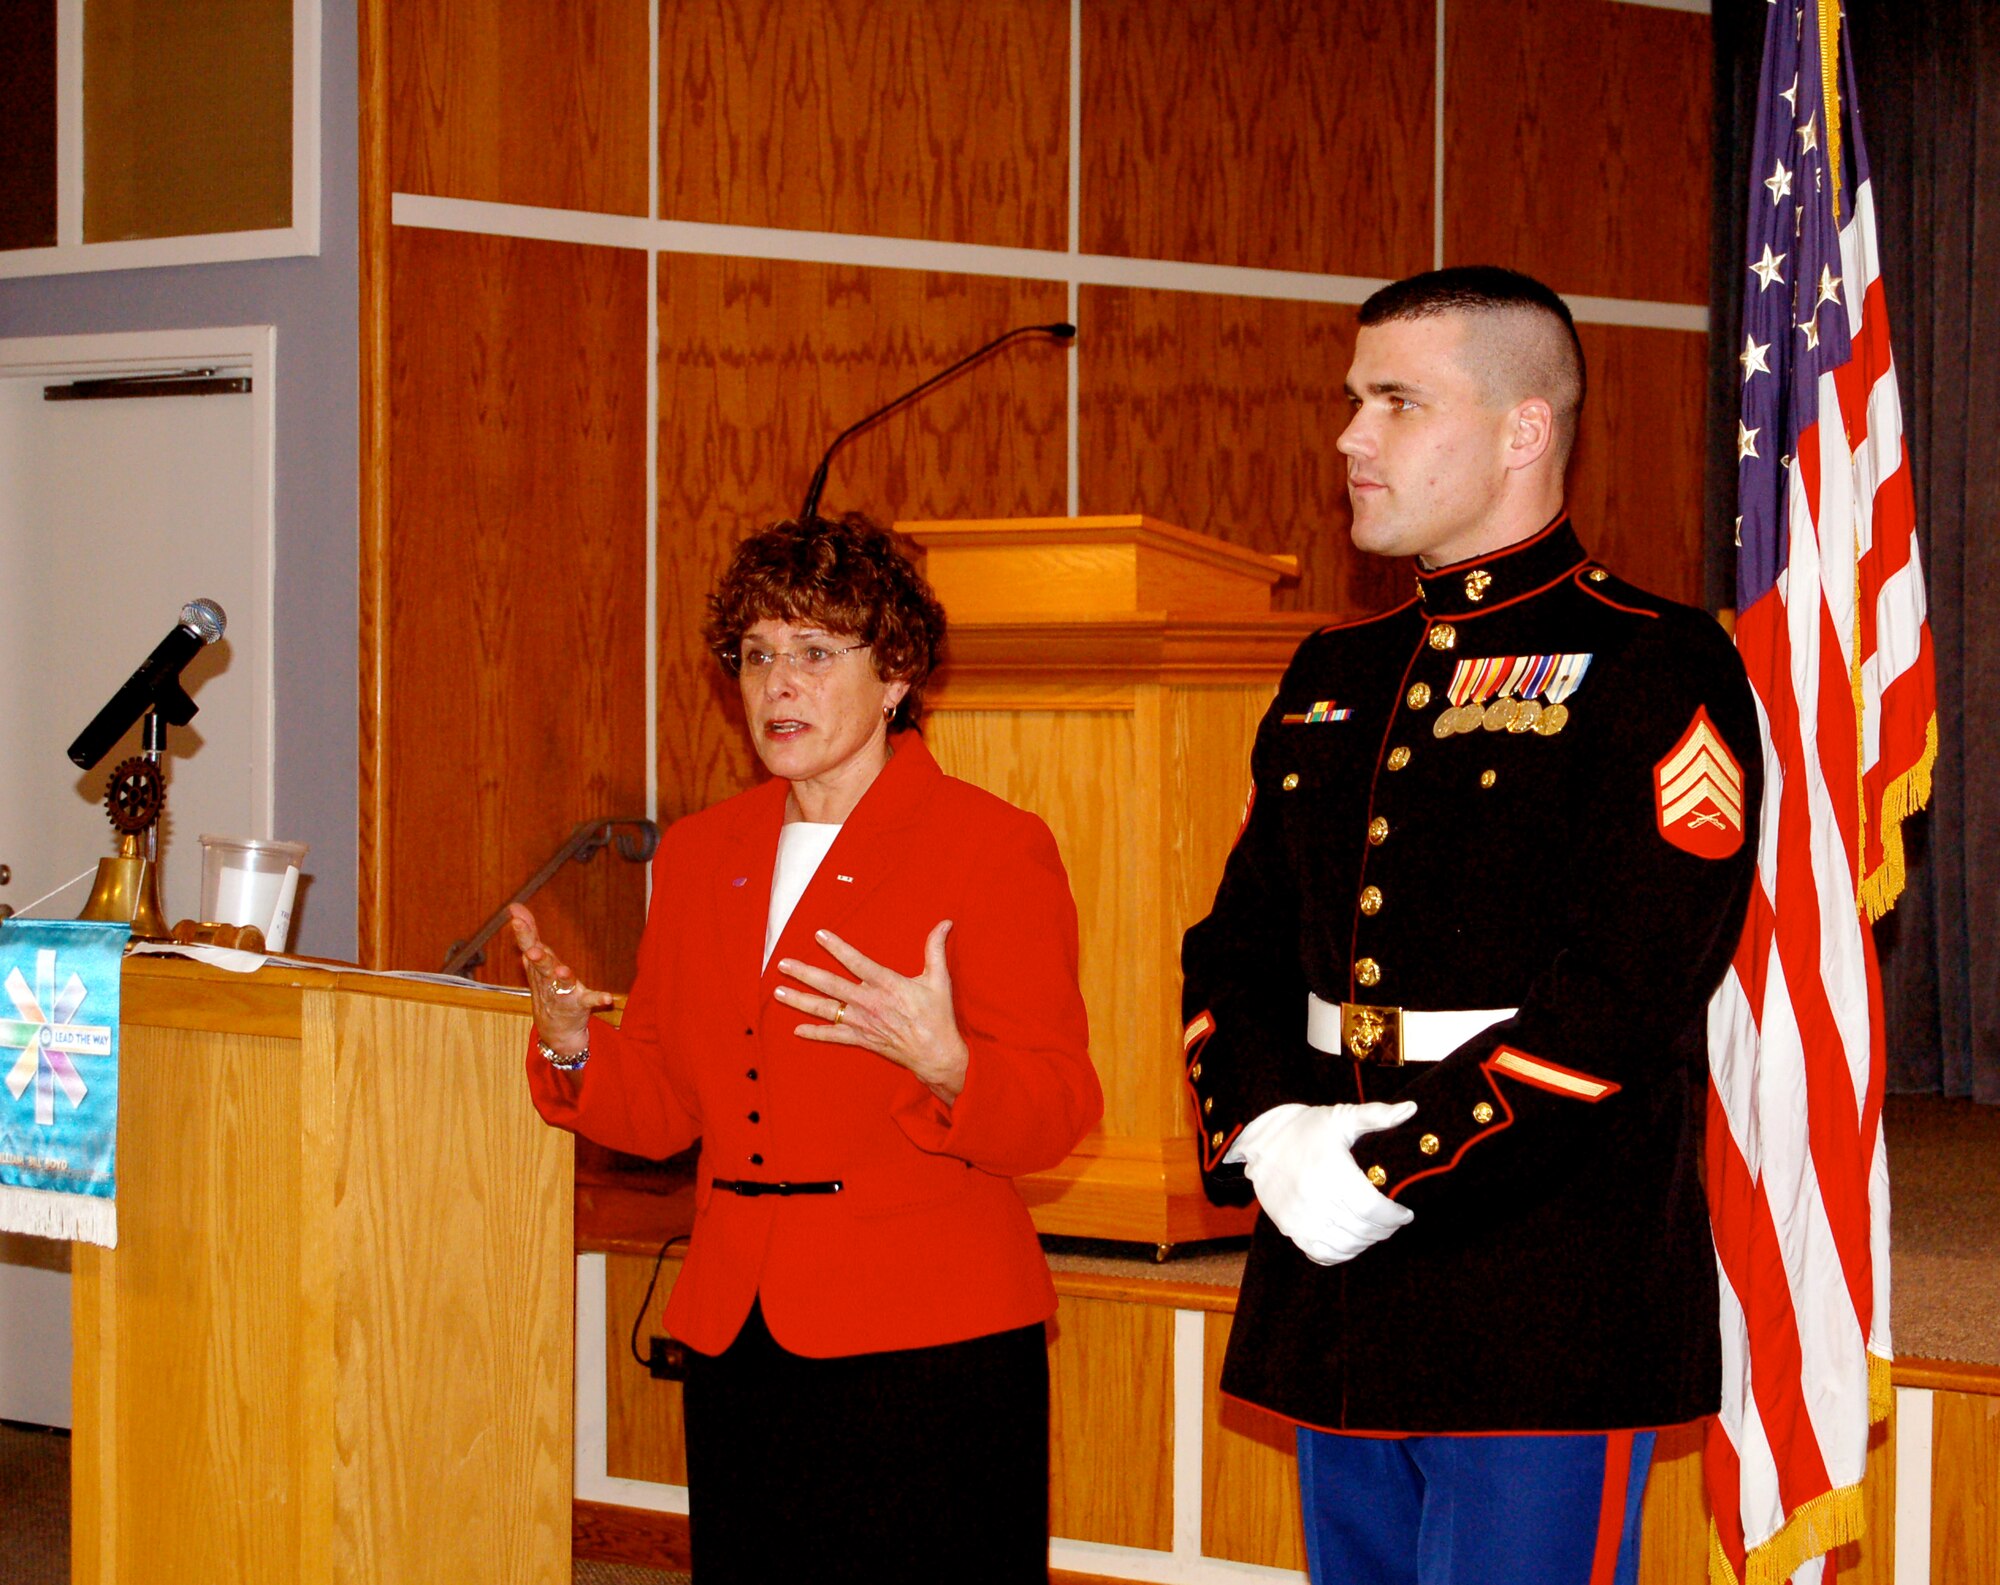 U.S. Marine Staff Sgt. Crowley is awarded a Quilt of Valor from Catherine Roberts, the founder of the Quilts of Valor Foundation, at the Nanticoke Rotary Club in Seaford, Del., Nov. 29, 2006. (Photo courtesy of Catherine C. Roberts, Quilts of Valor Foundation)